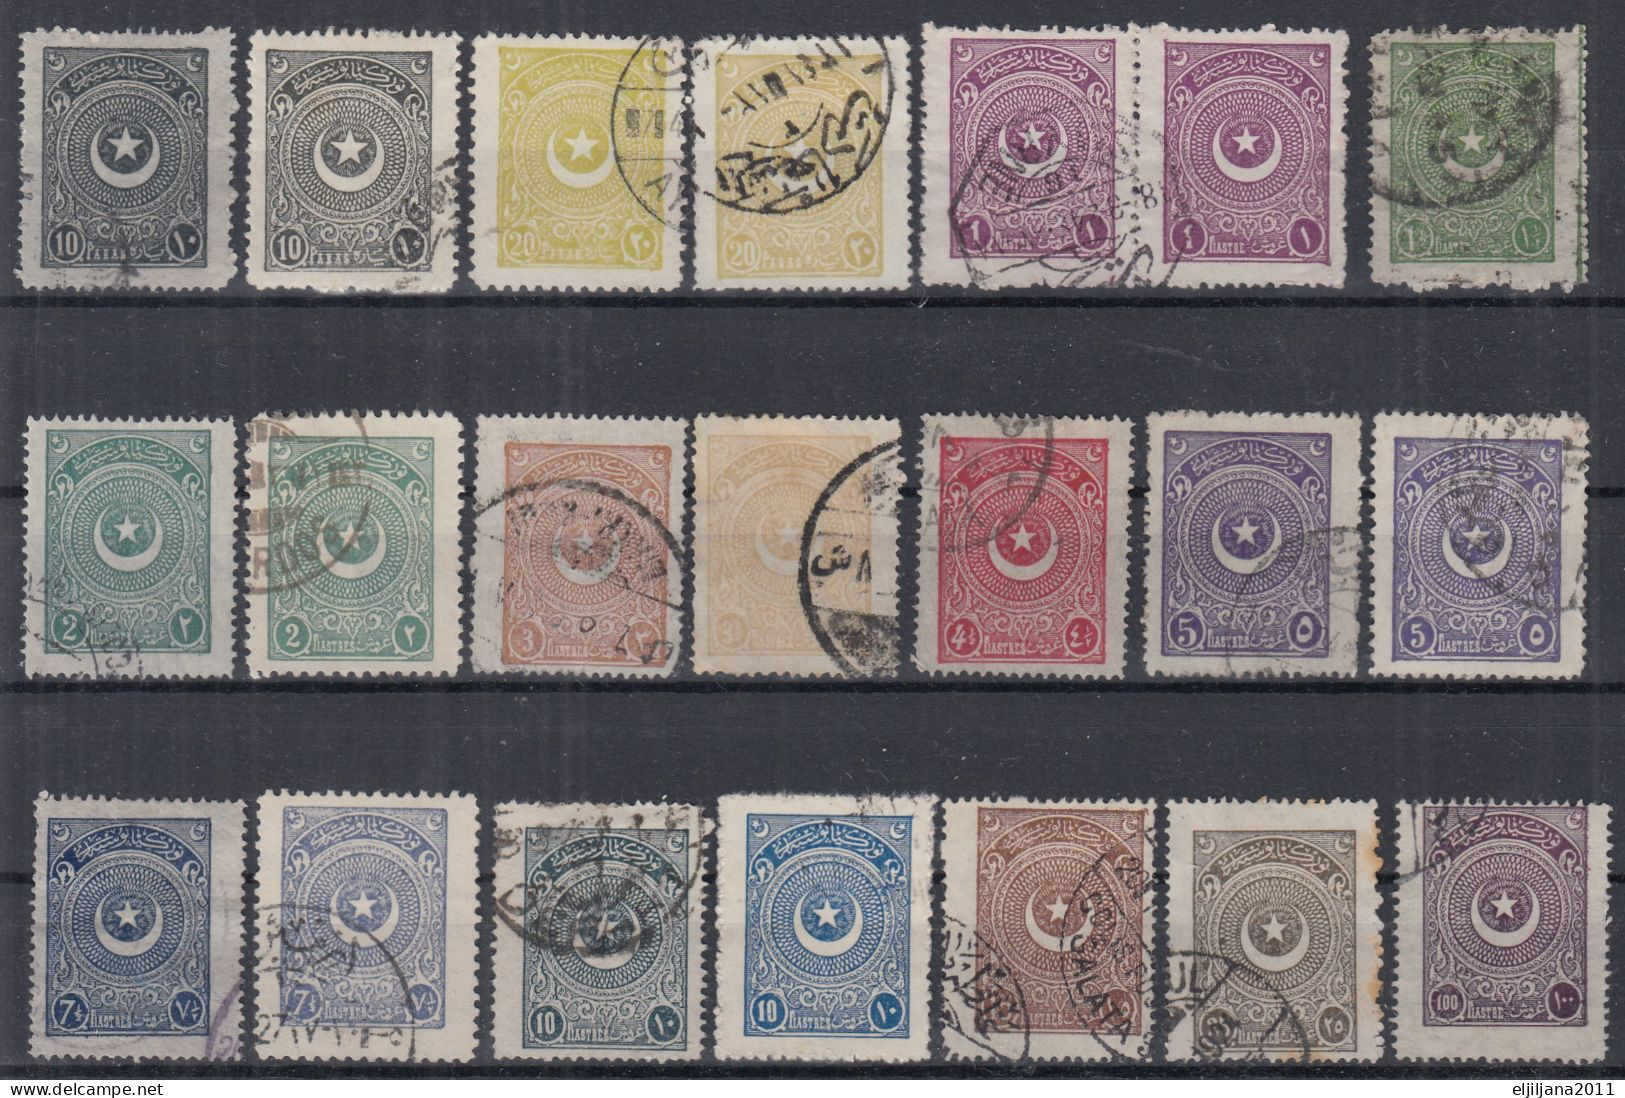 Action !! SALE !! 50 % Turkey / Türkei 1923 - 1925 ⁕ Star And Crescent In A Circle ⁕ 21v Used / Shades - Different Perf. - Used Stamps